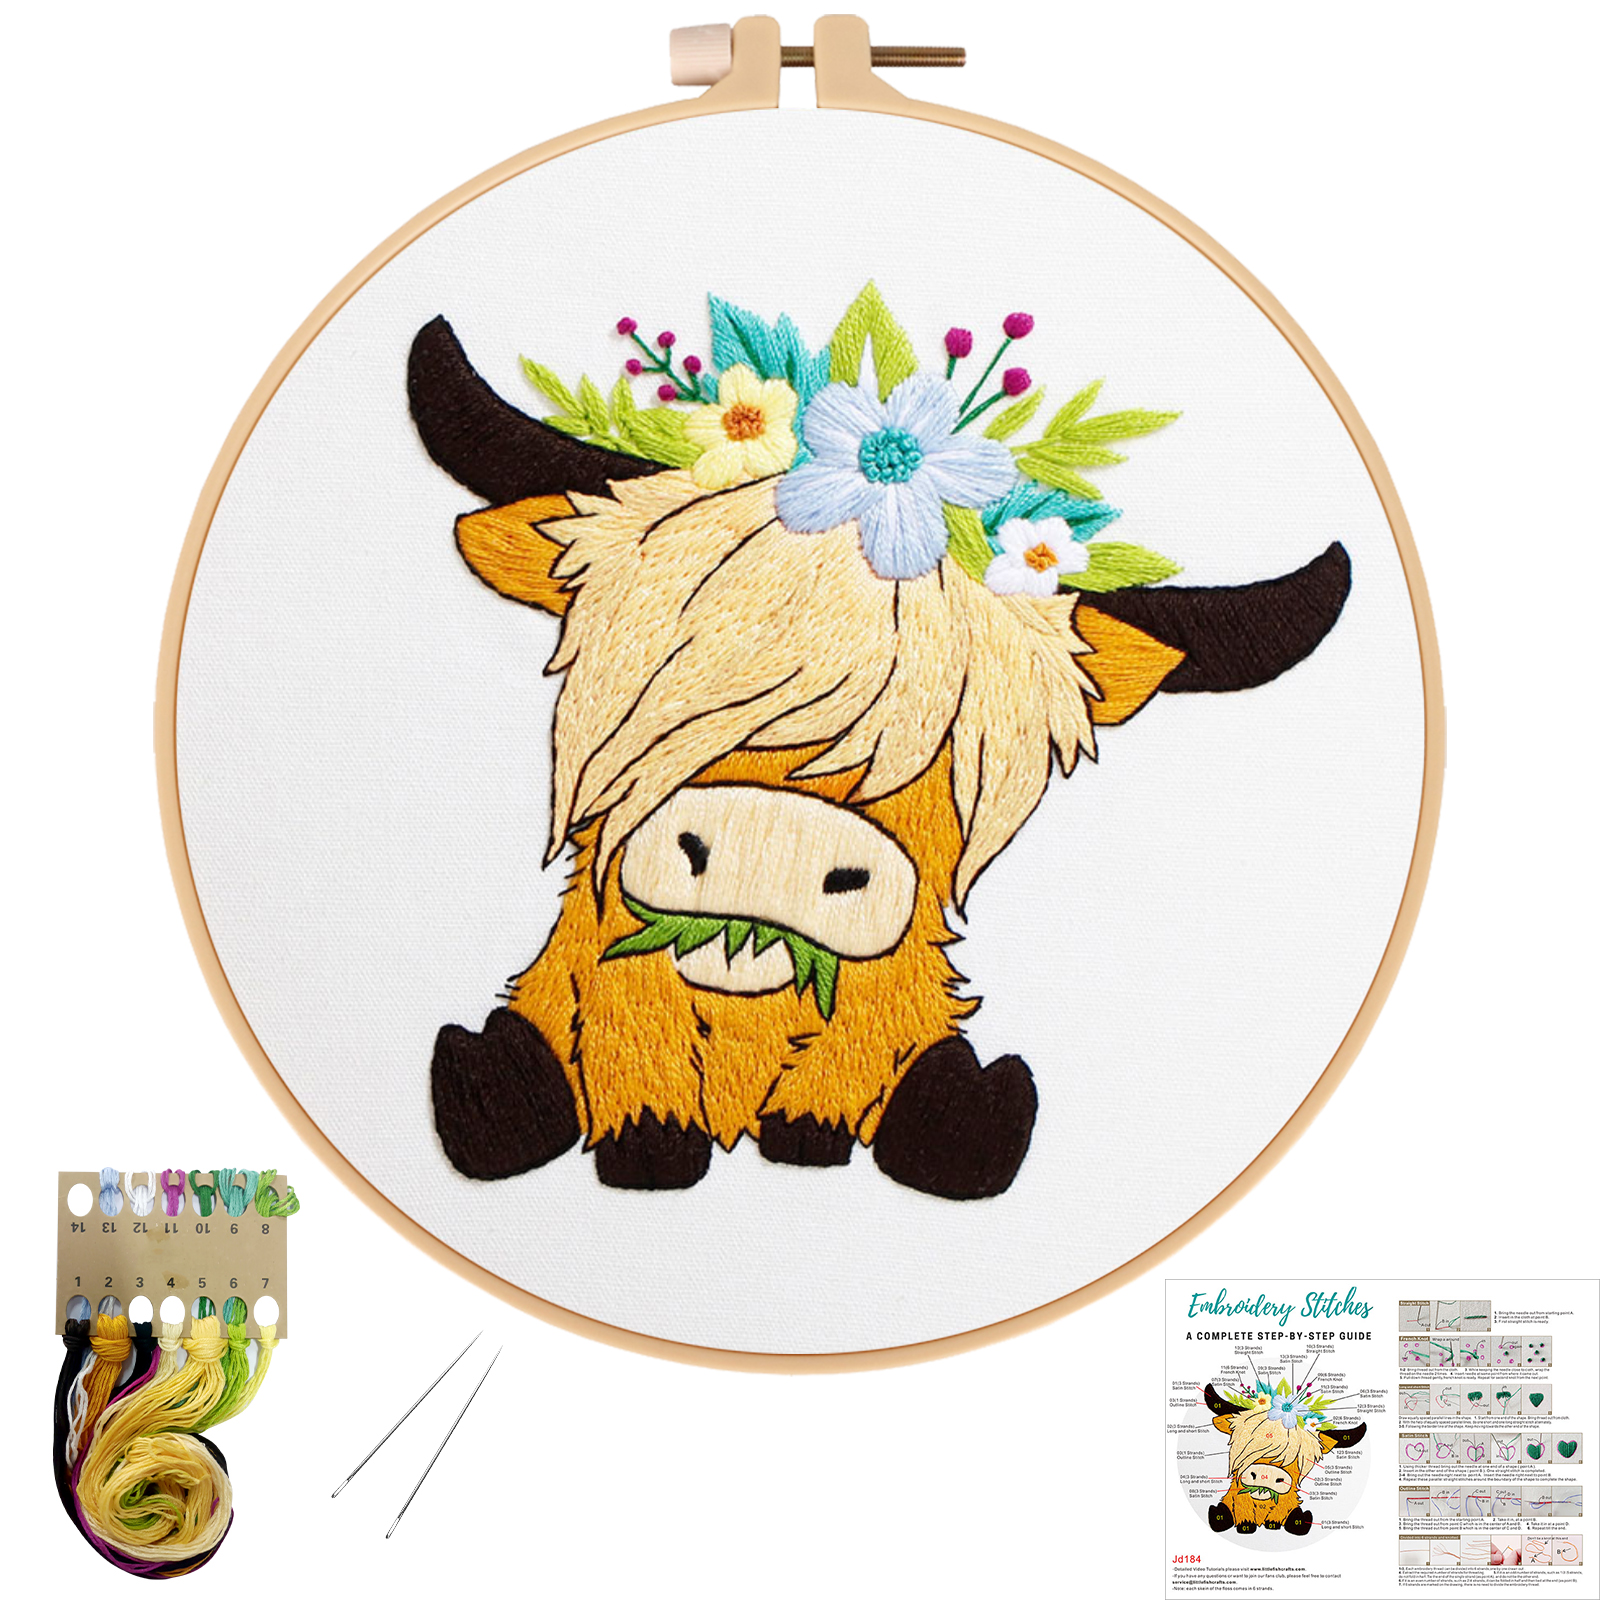 Embroidery Starter Kit Cross stitch kit for Adult Beginner -Highland Cow pattern